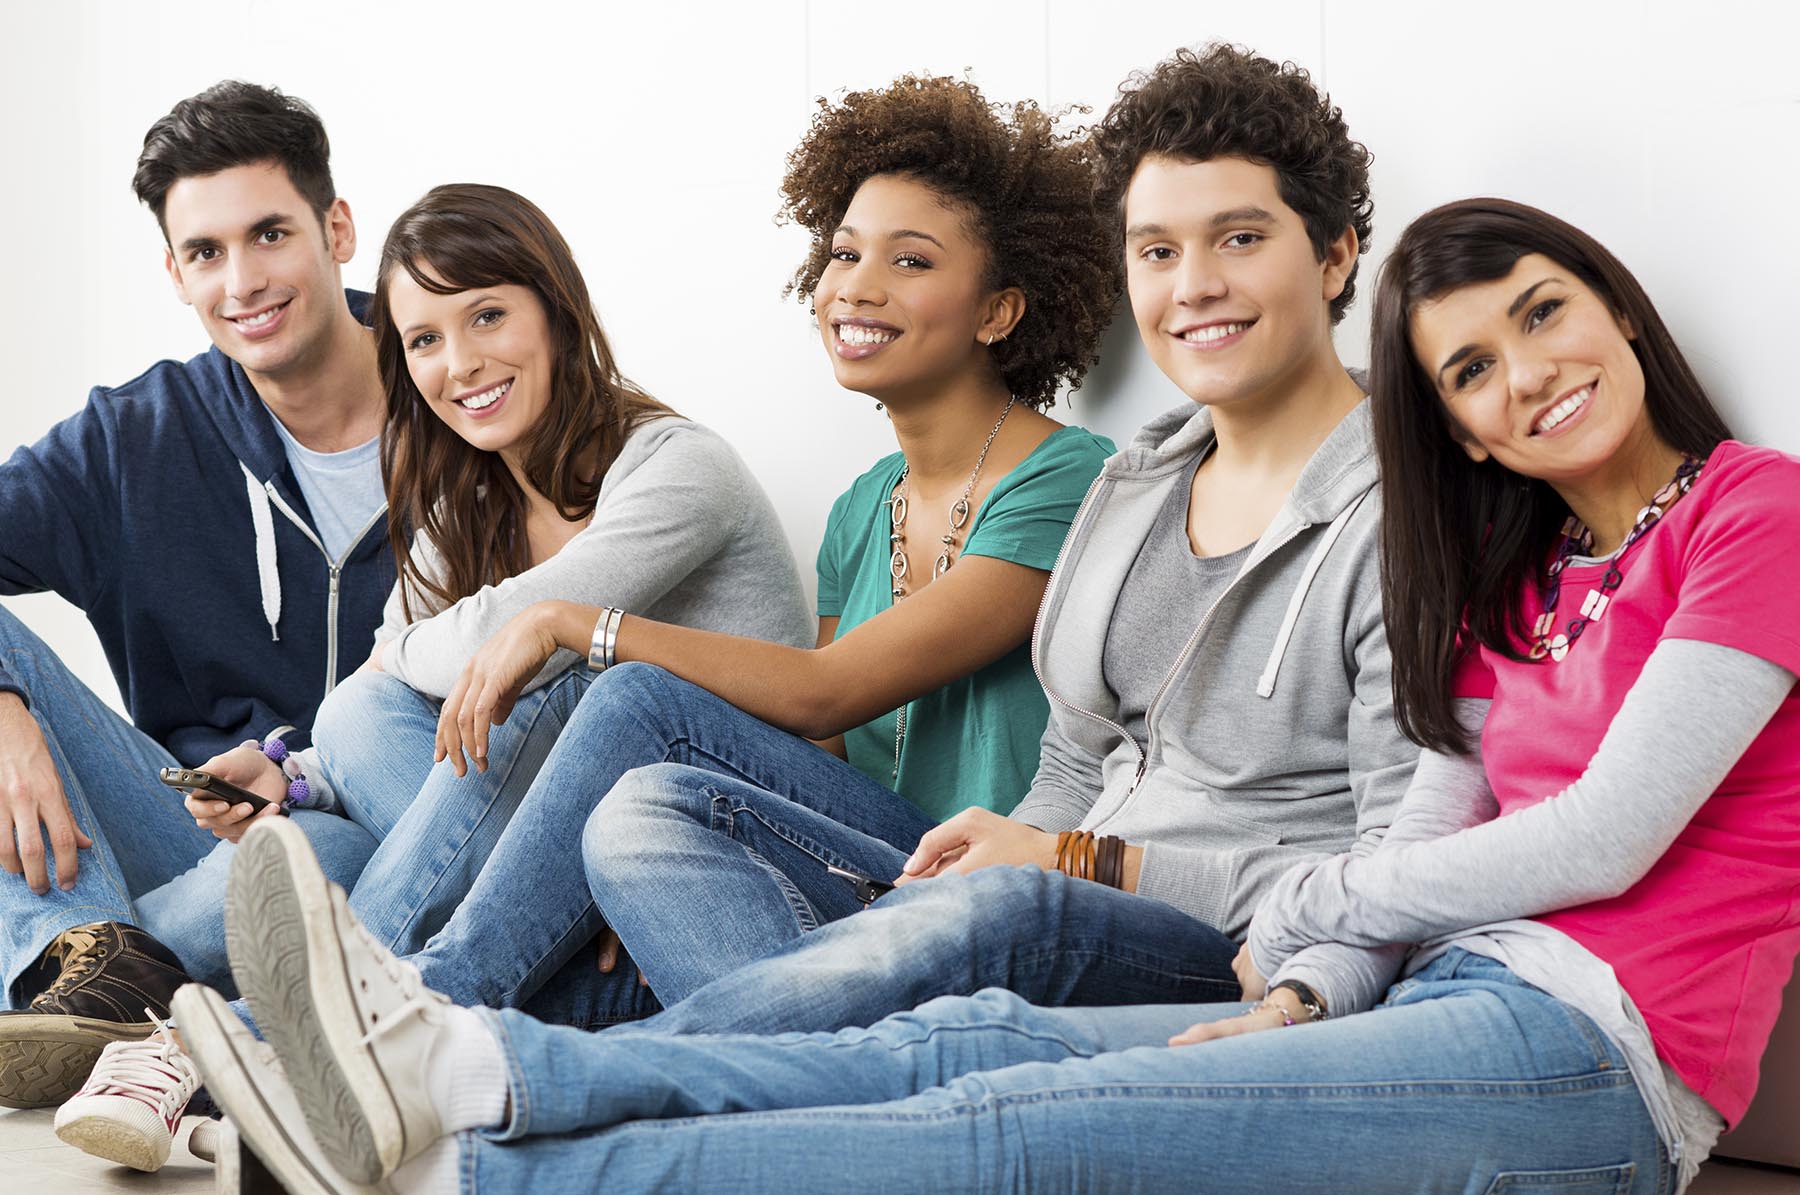 Arizona Therapists for Teens and 20s Adolescents - Therapy an Counseling in Mesa - AZRI